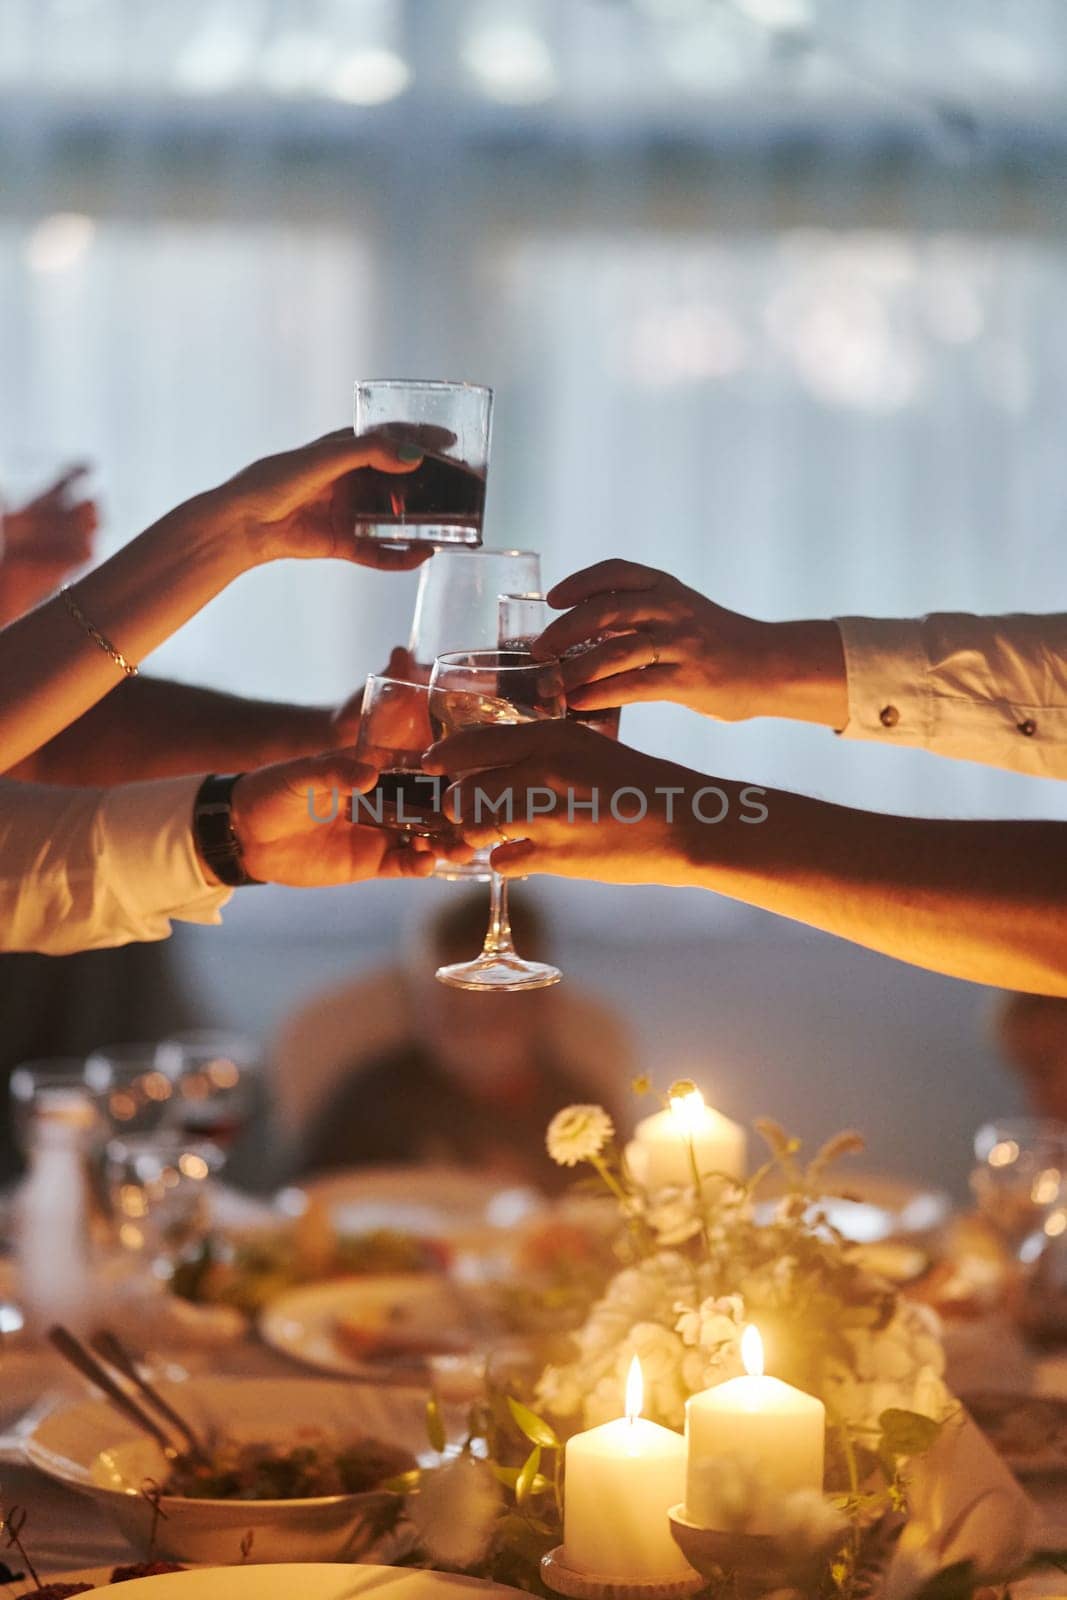 Clink glasses at a wedding celebration after saying congratulations. High quality photo